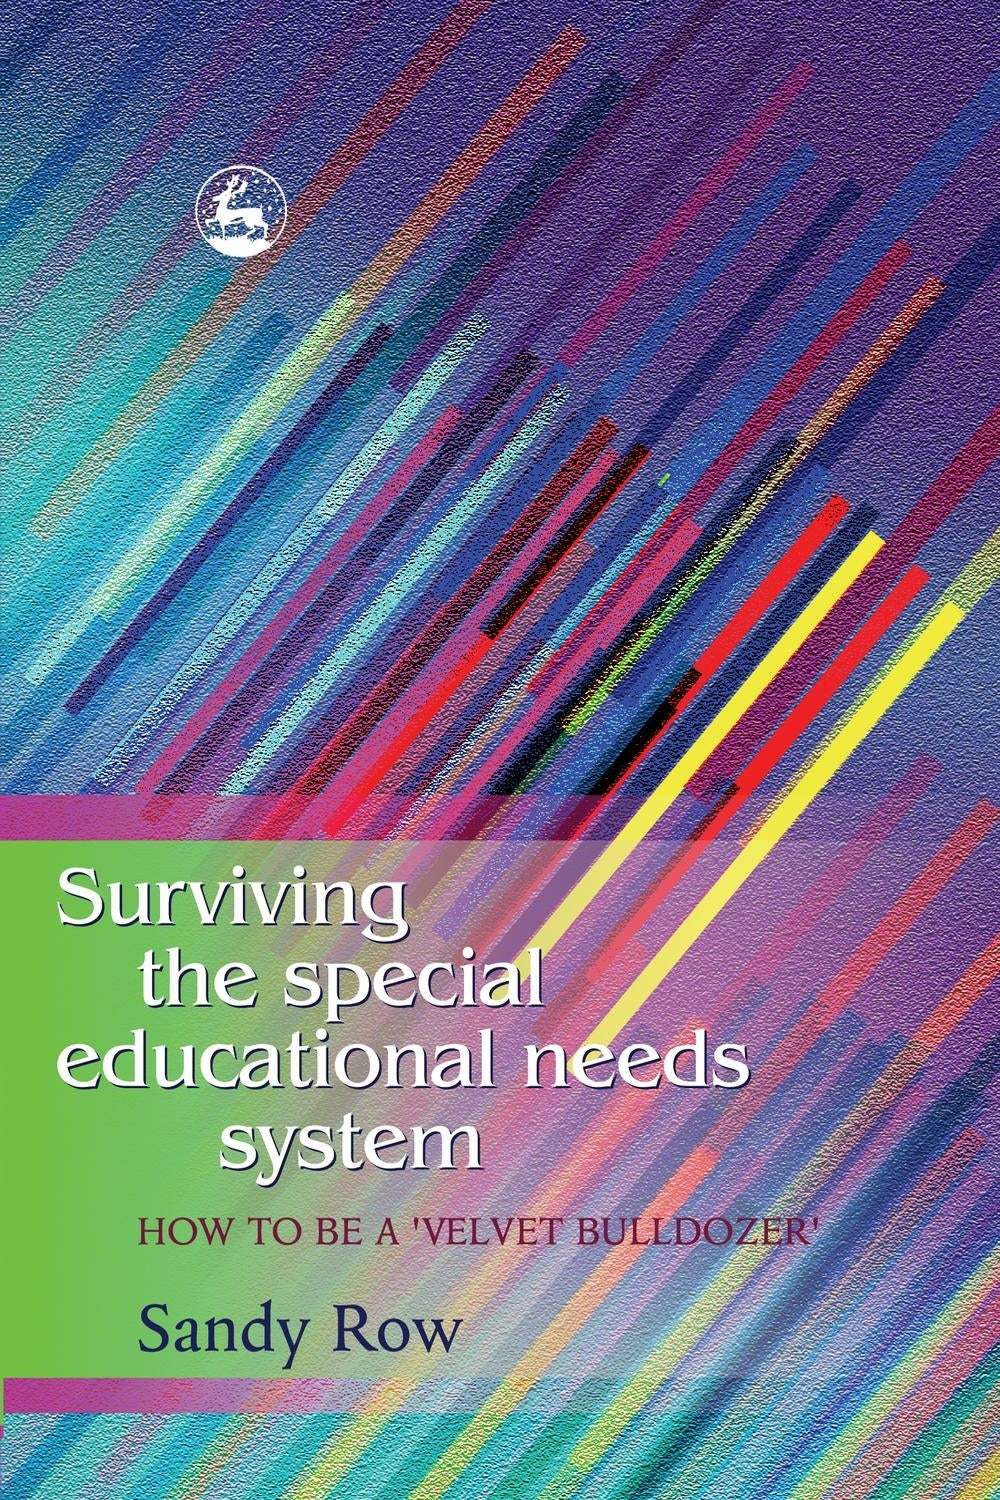 Surviving the Special Educational Needs System by Sandy Row